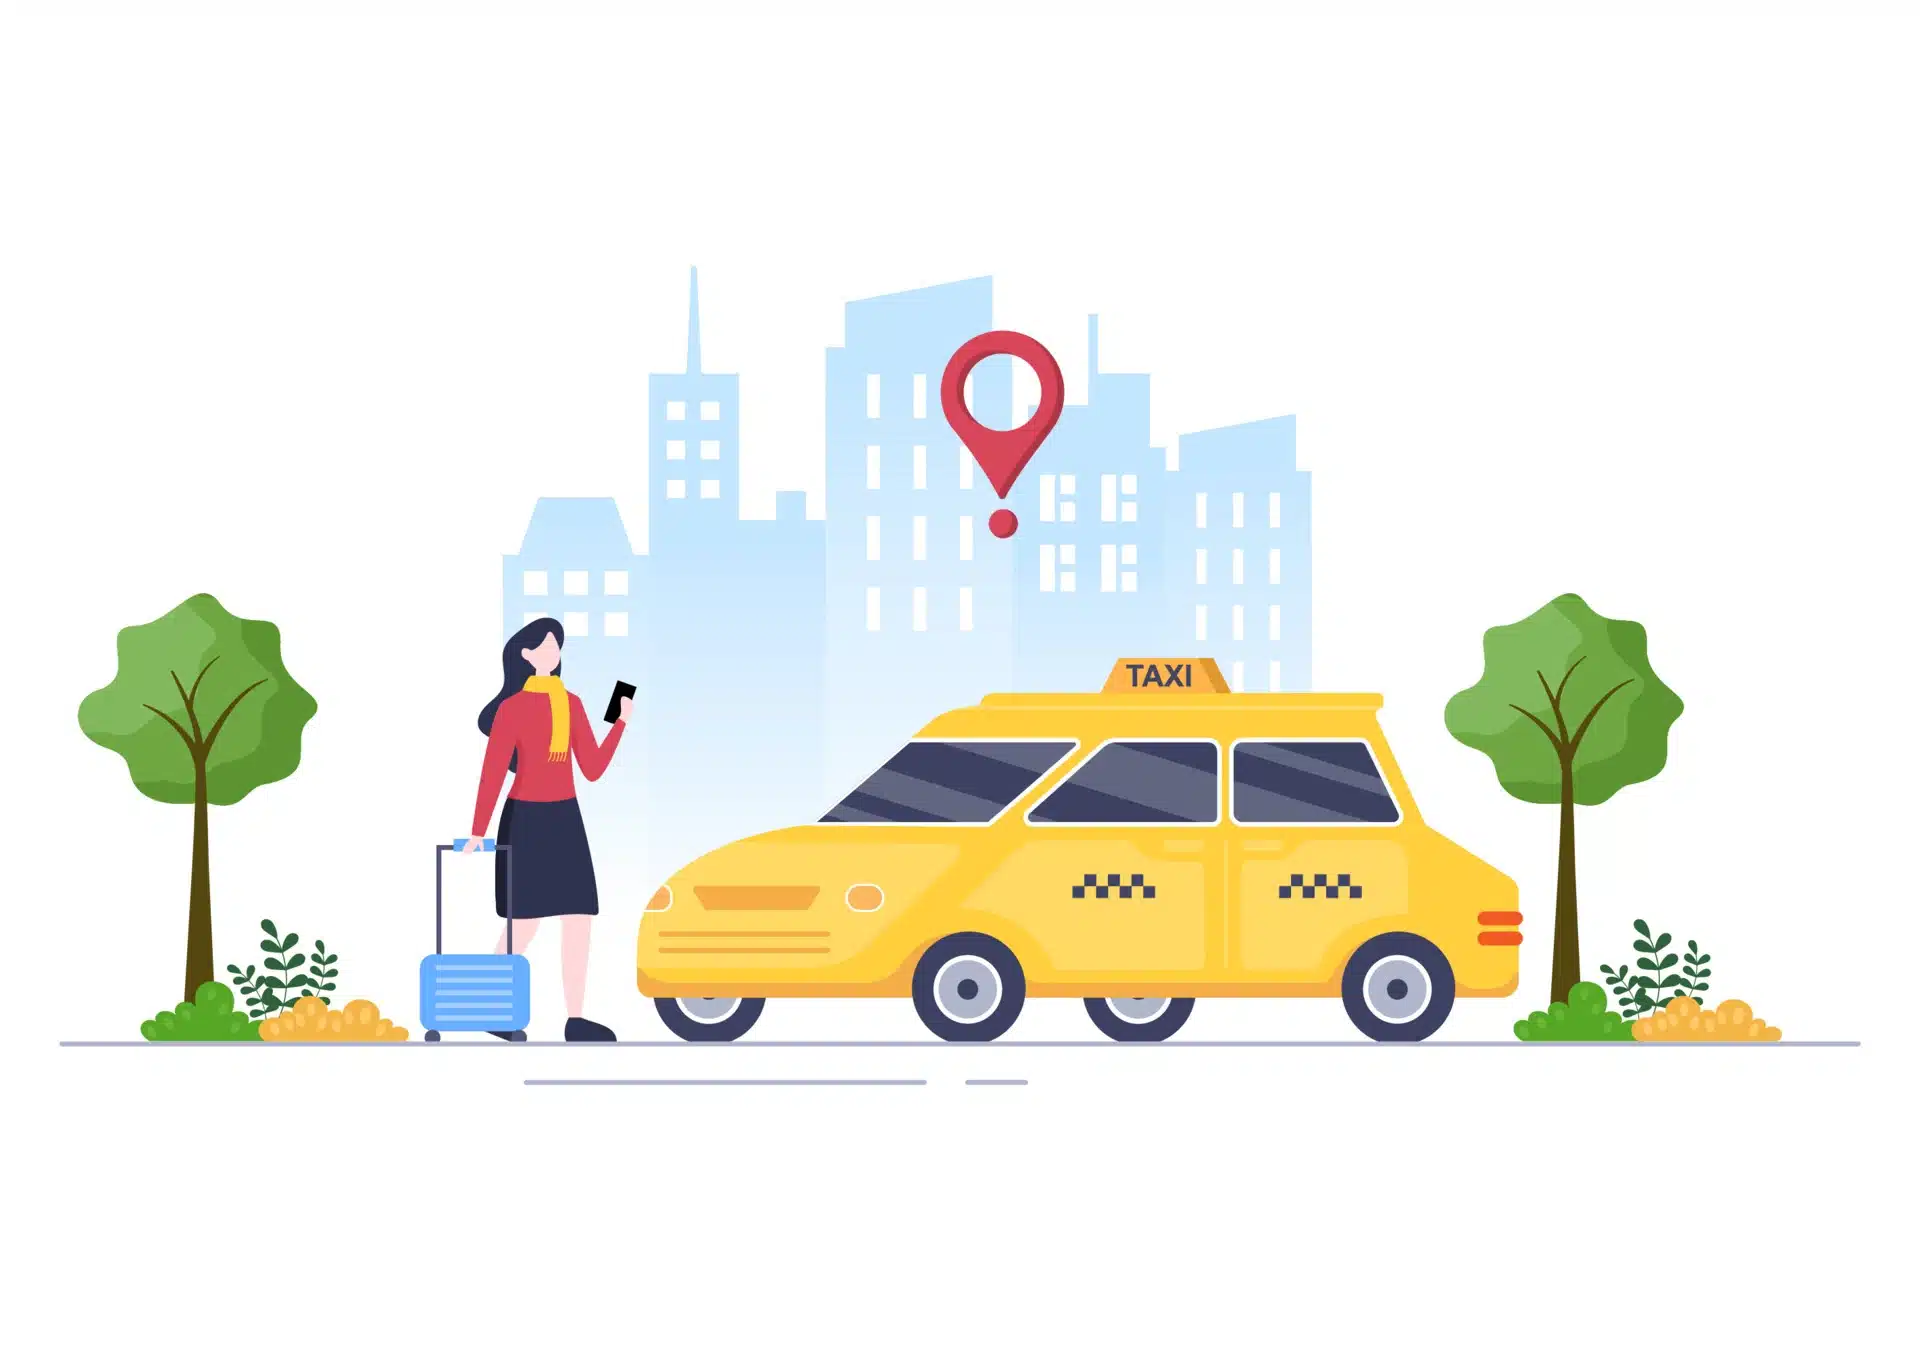 How To Book The Best Local Drop Taxi Service In Bangalore